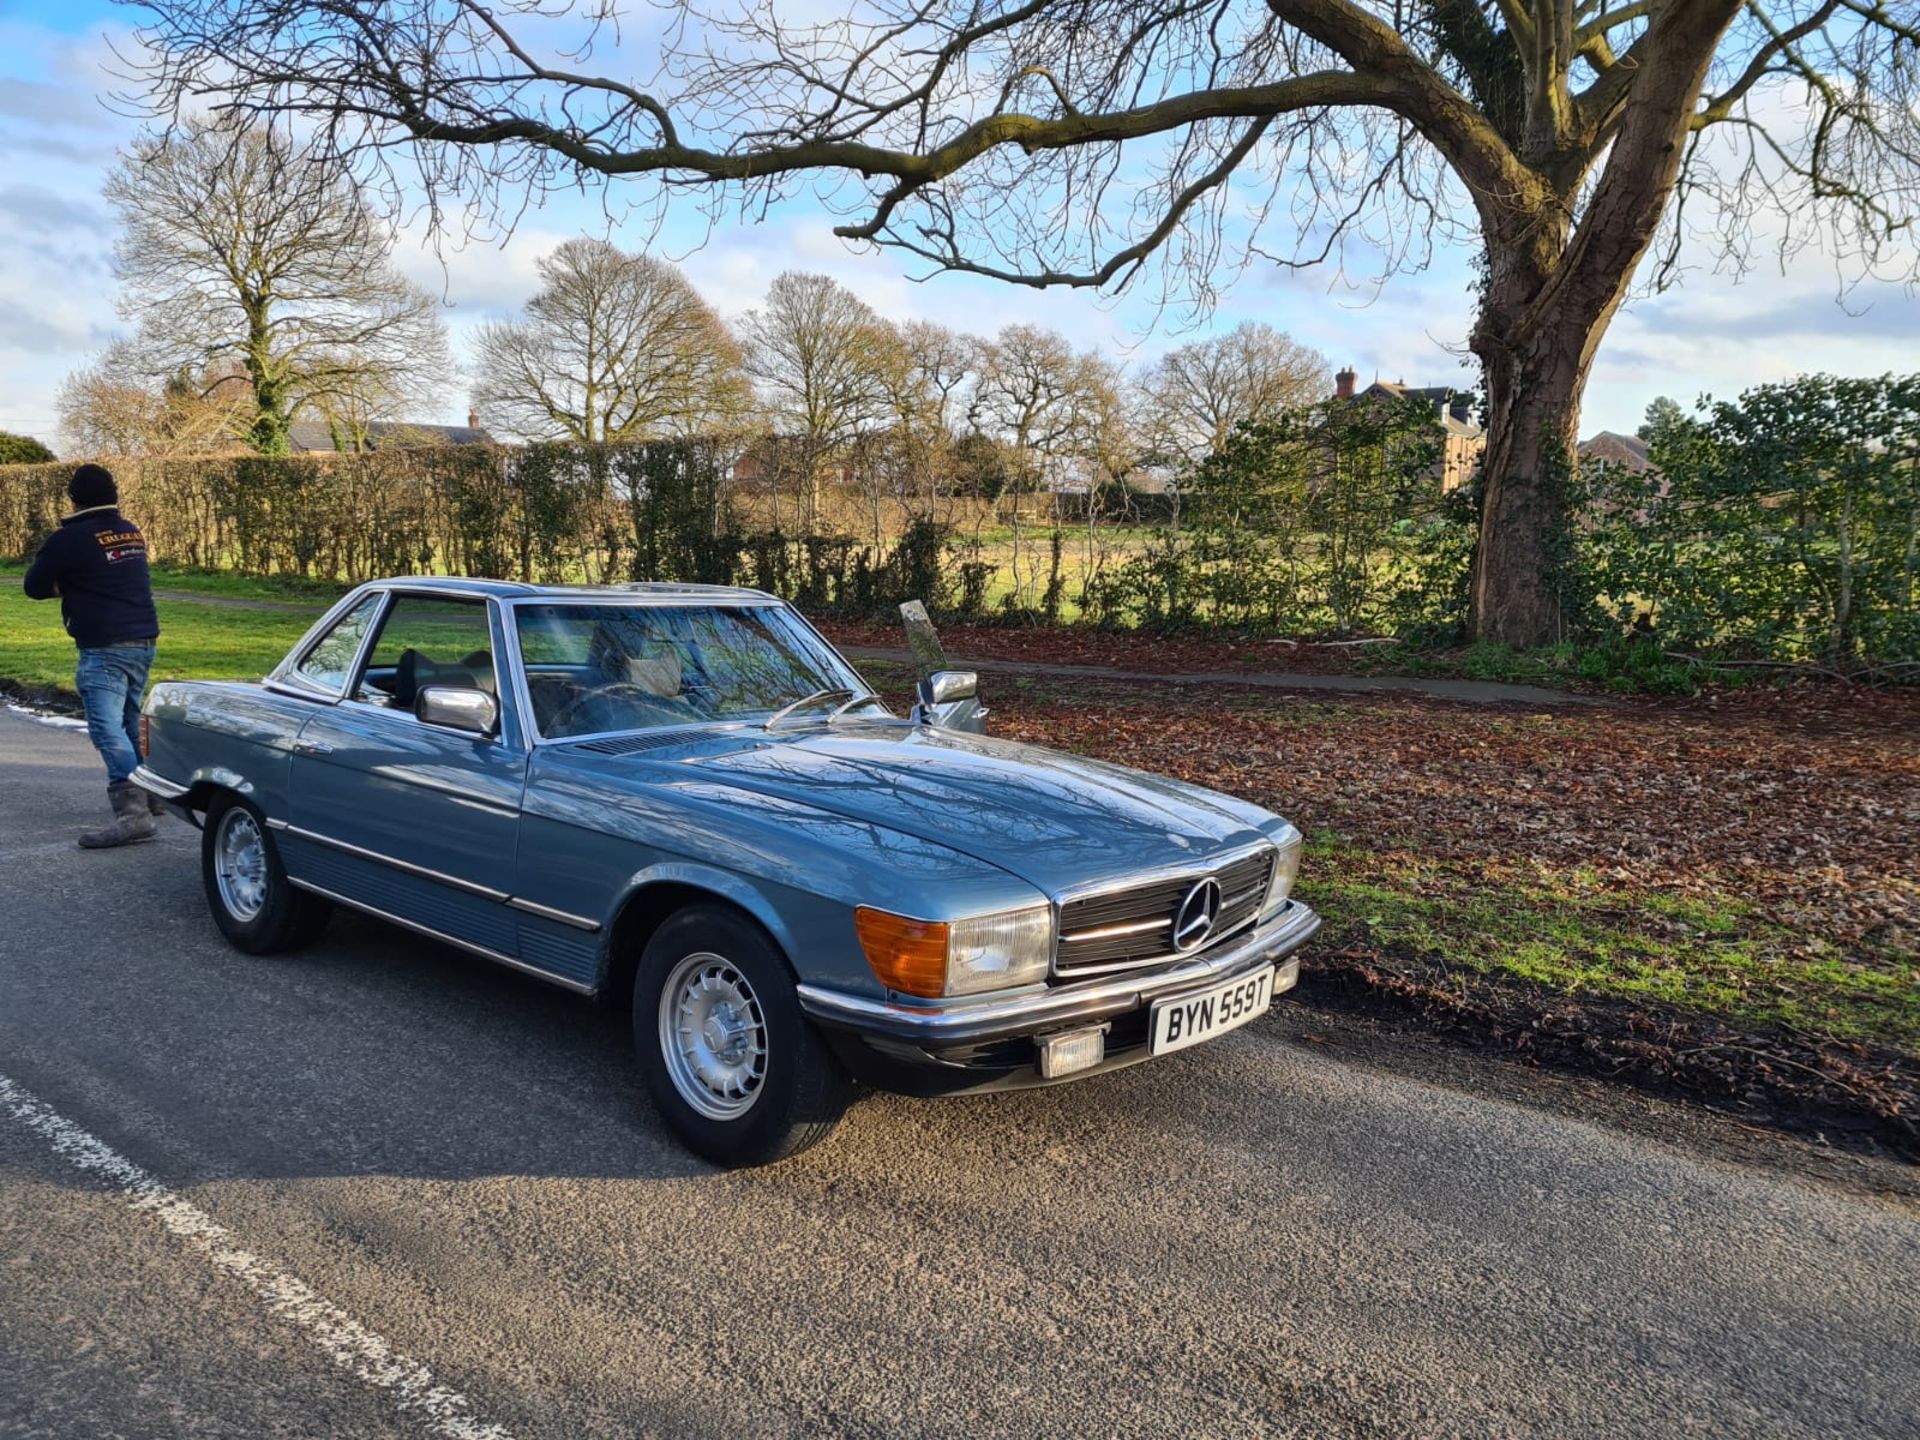 Stunning 1979 Mercedes Benz SL350 V8 With Factory Hardtop - Restored in 2018 - Image 18 of 22